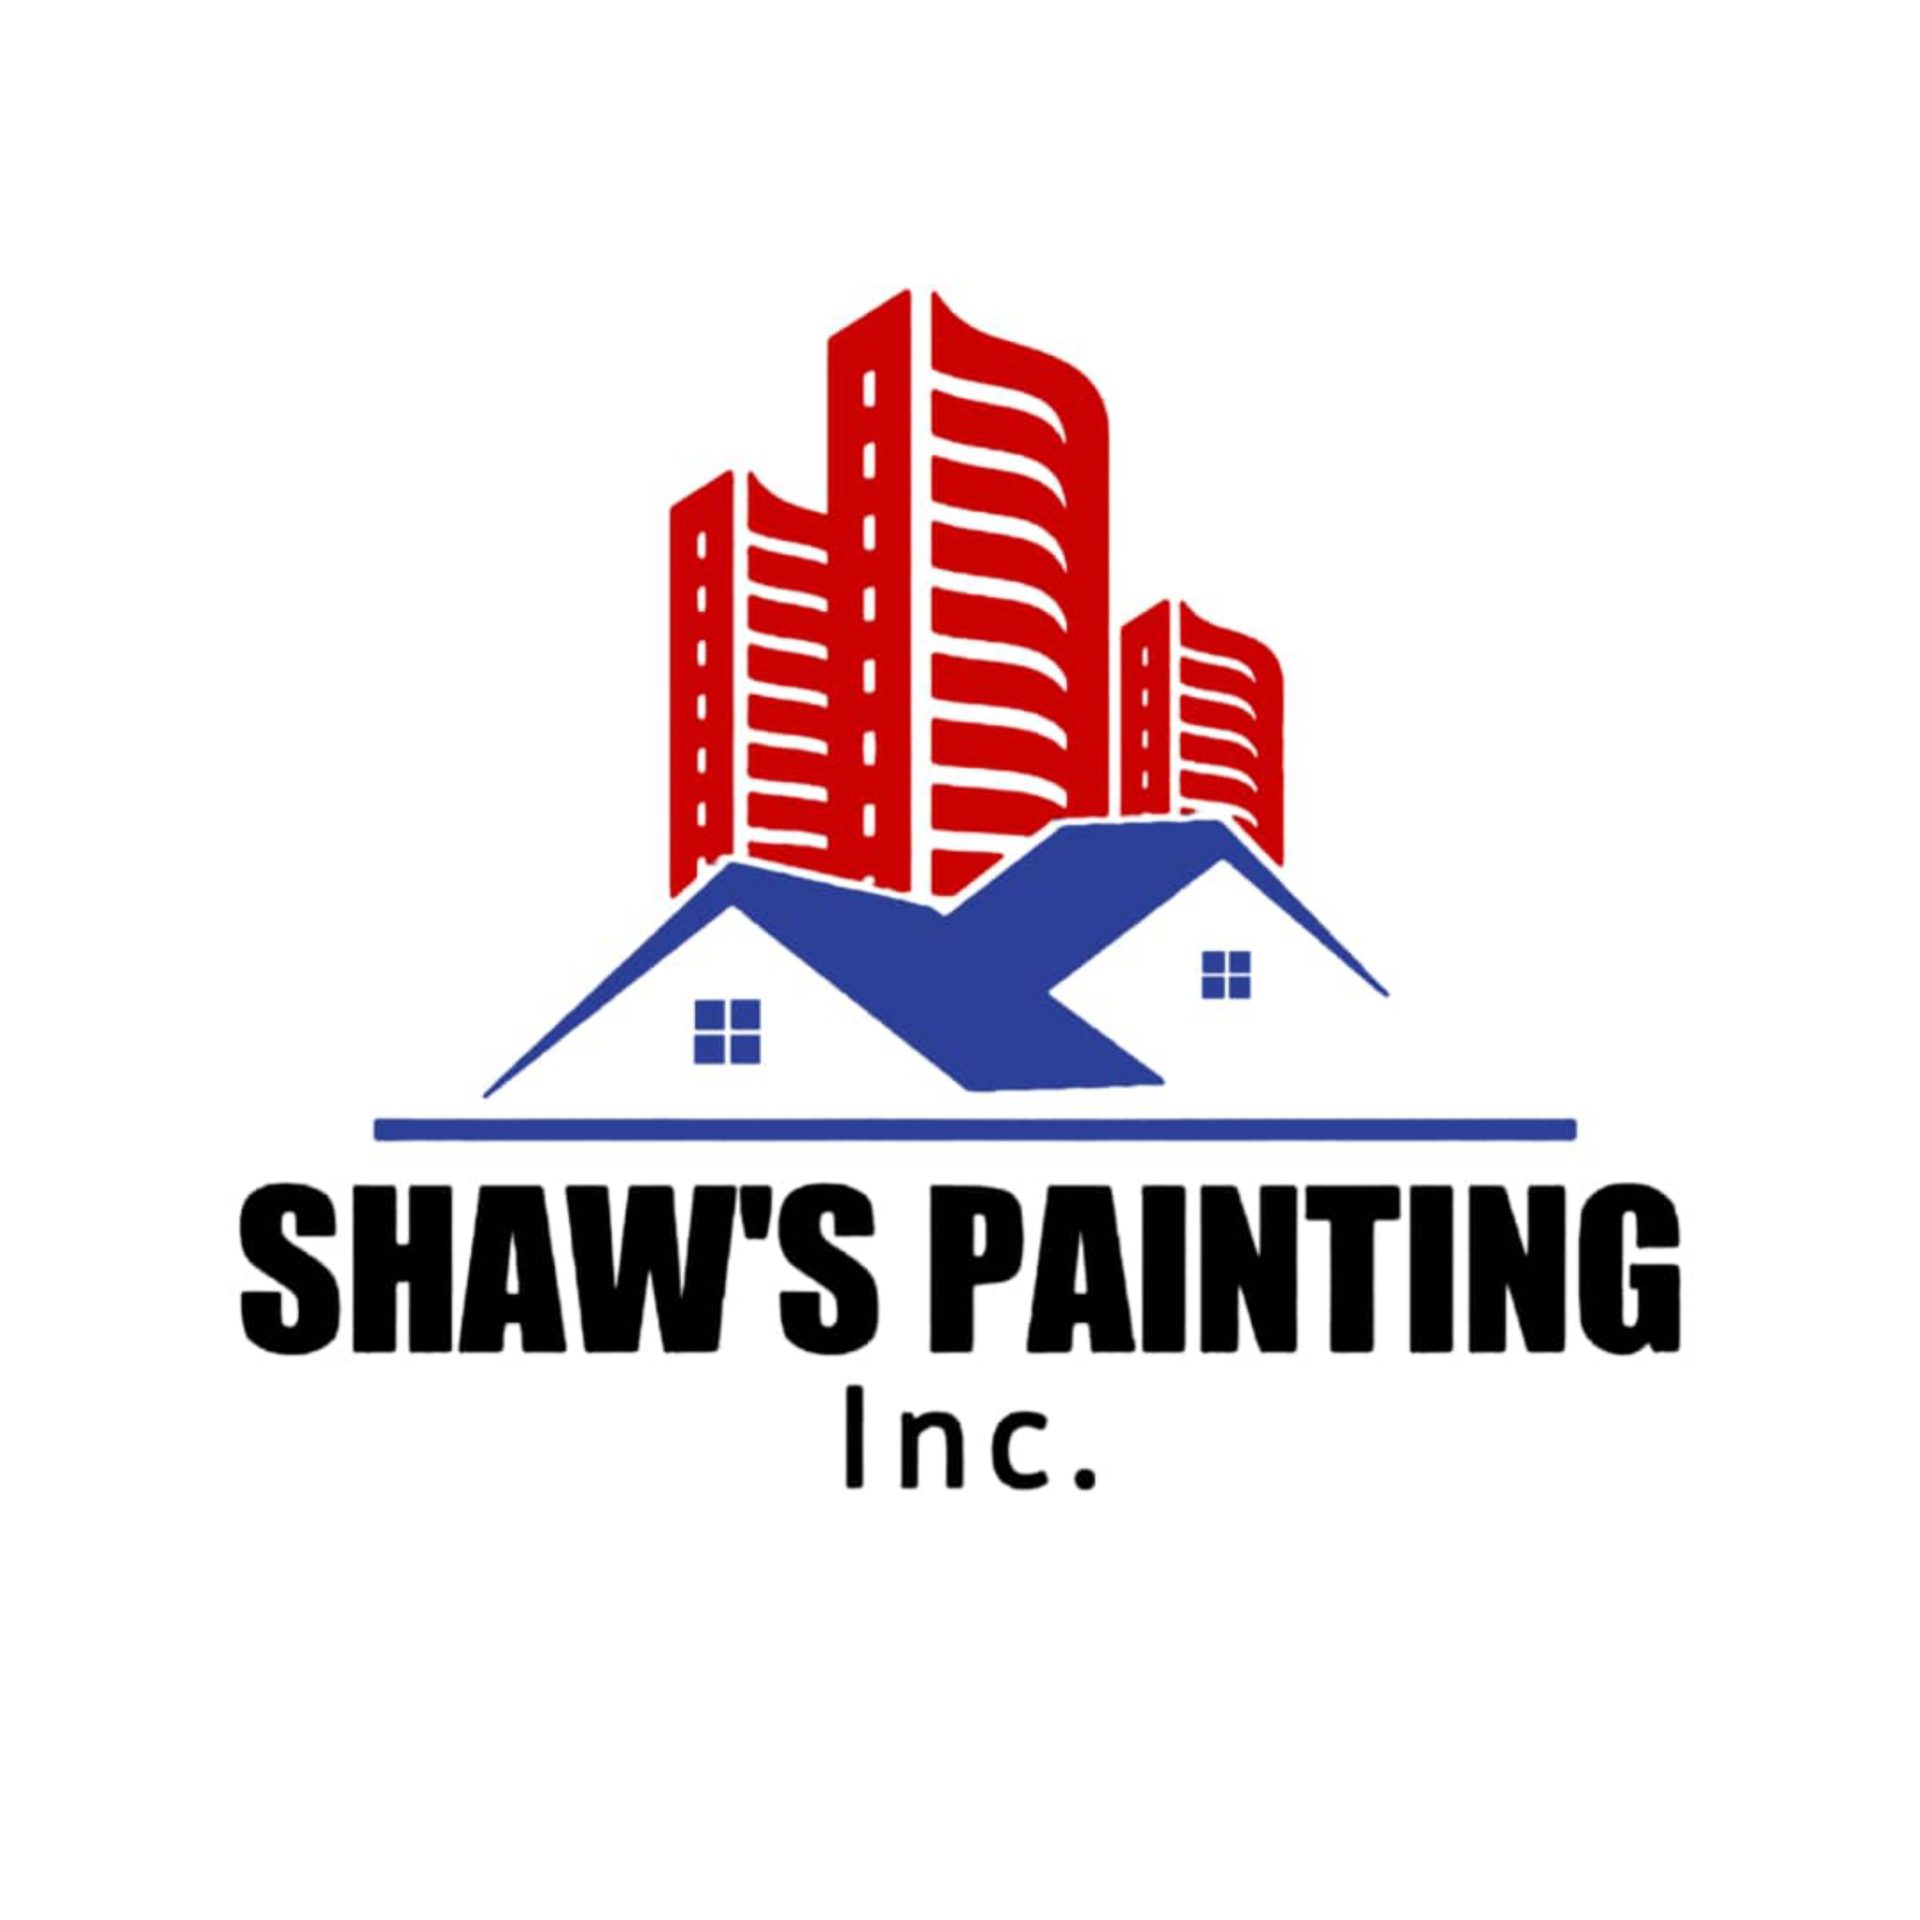 Shaw's Painting Inc.